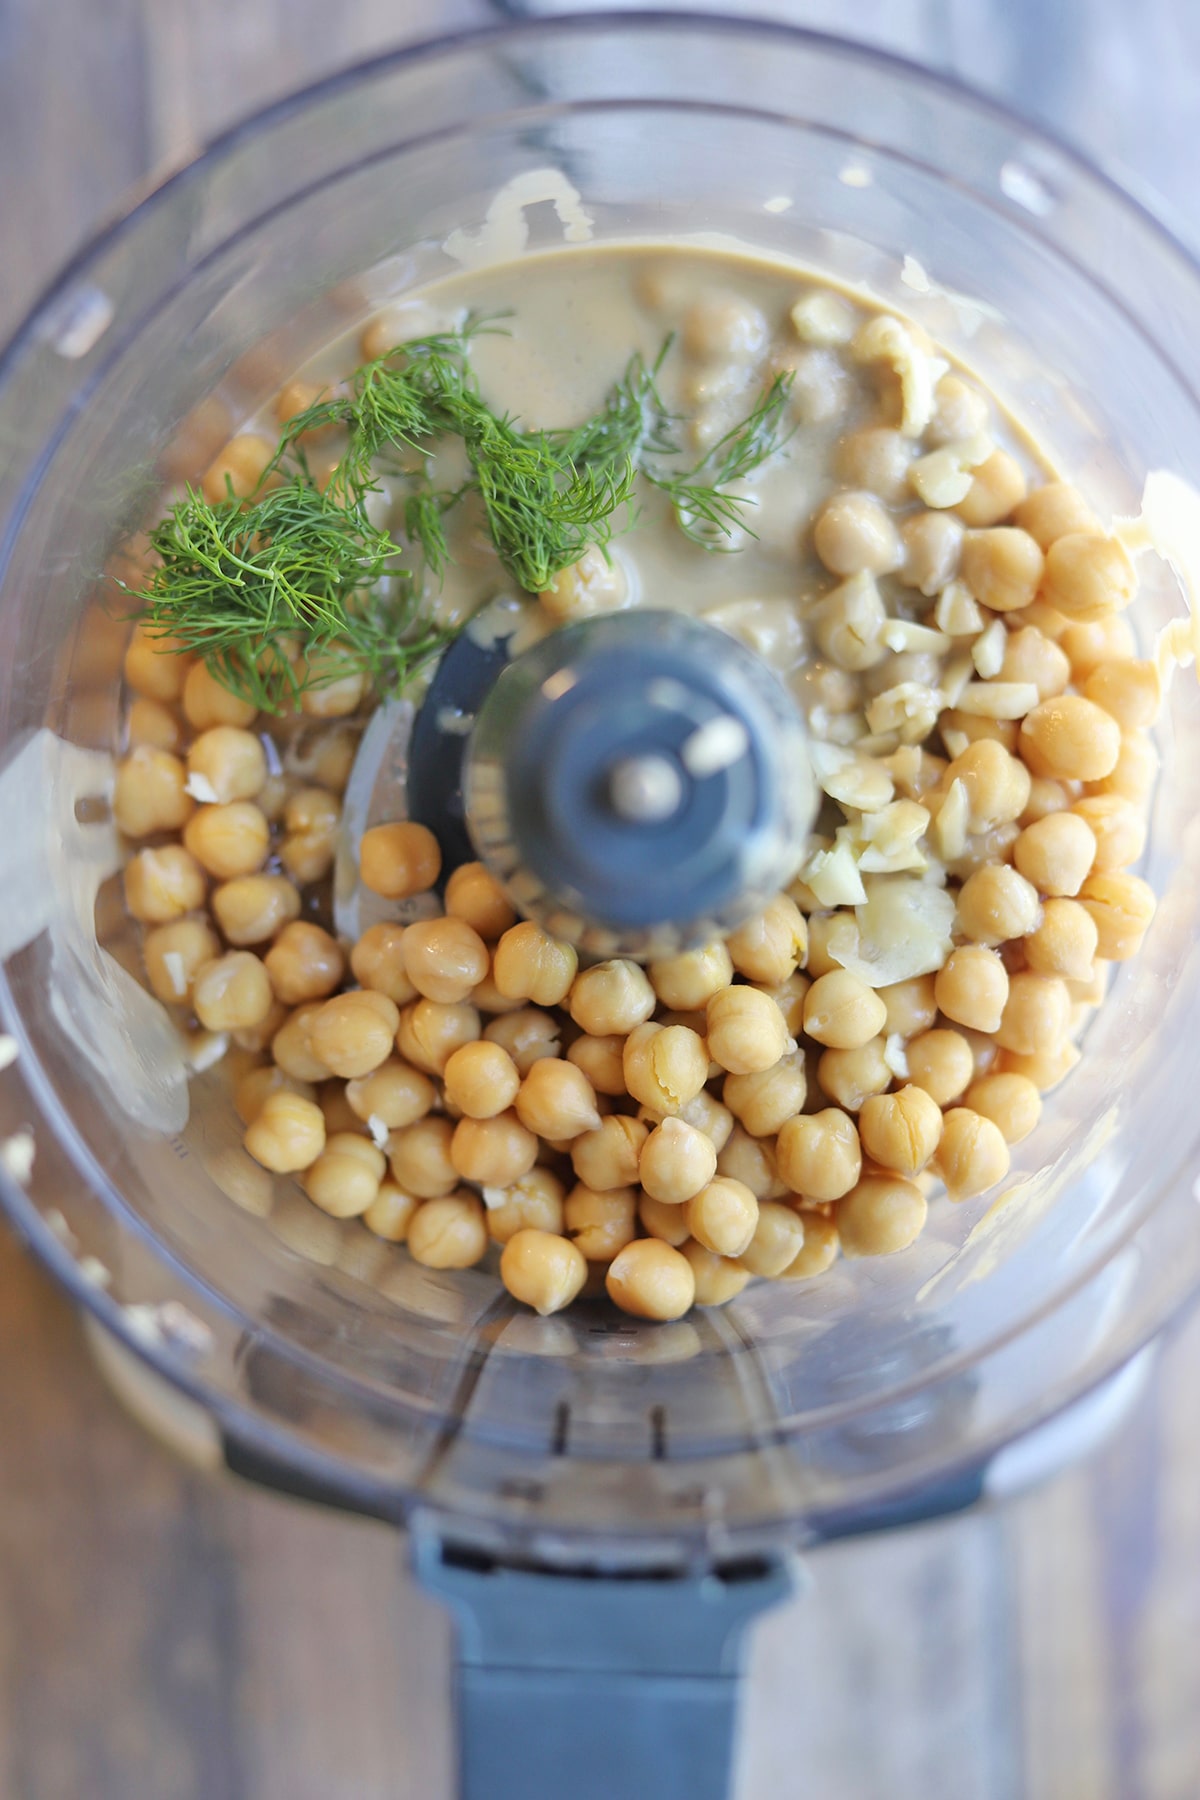 Chickpeas, tahini, dill, and garlic in food processor bowl.